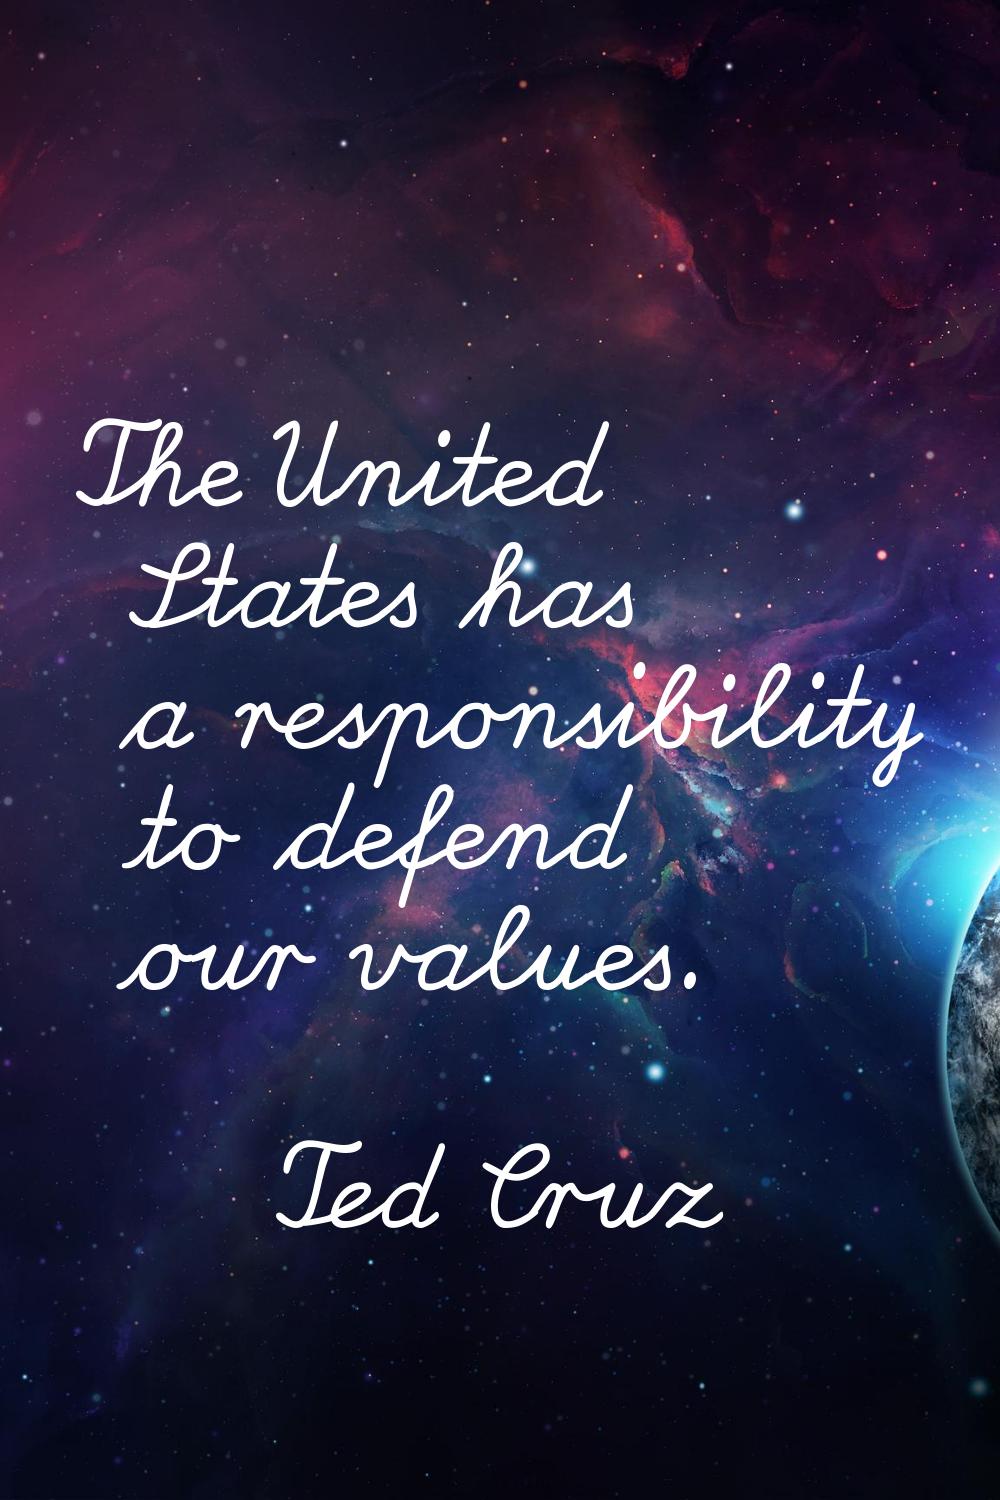 The United States has a responsibility to defend our values.